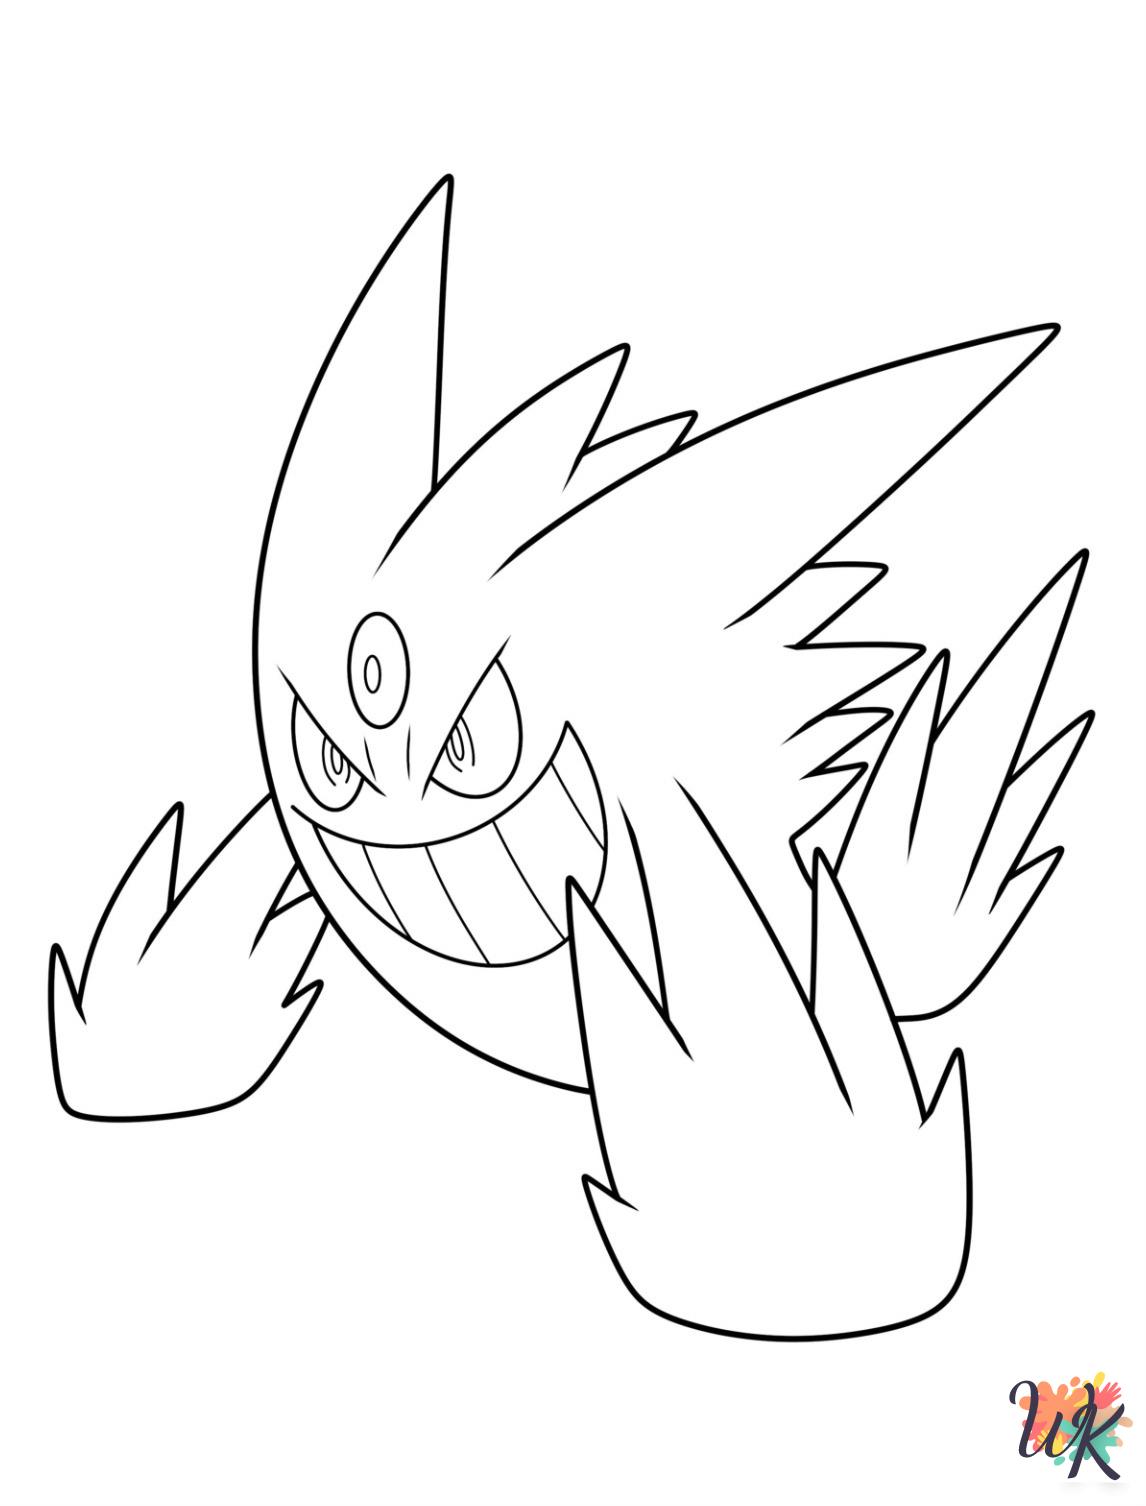 Gengar coloring pages for adults pdf